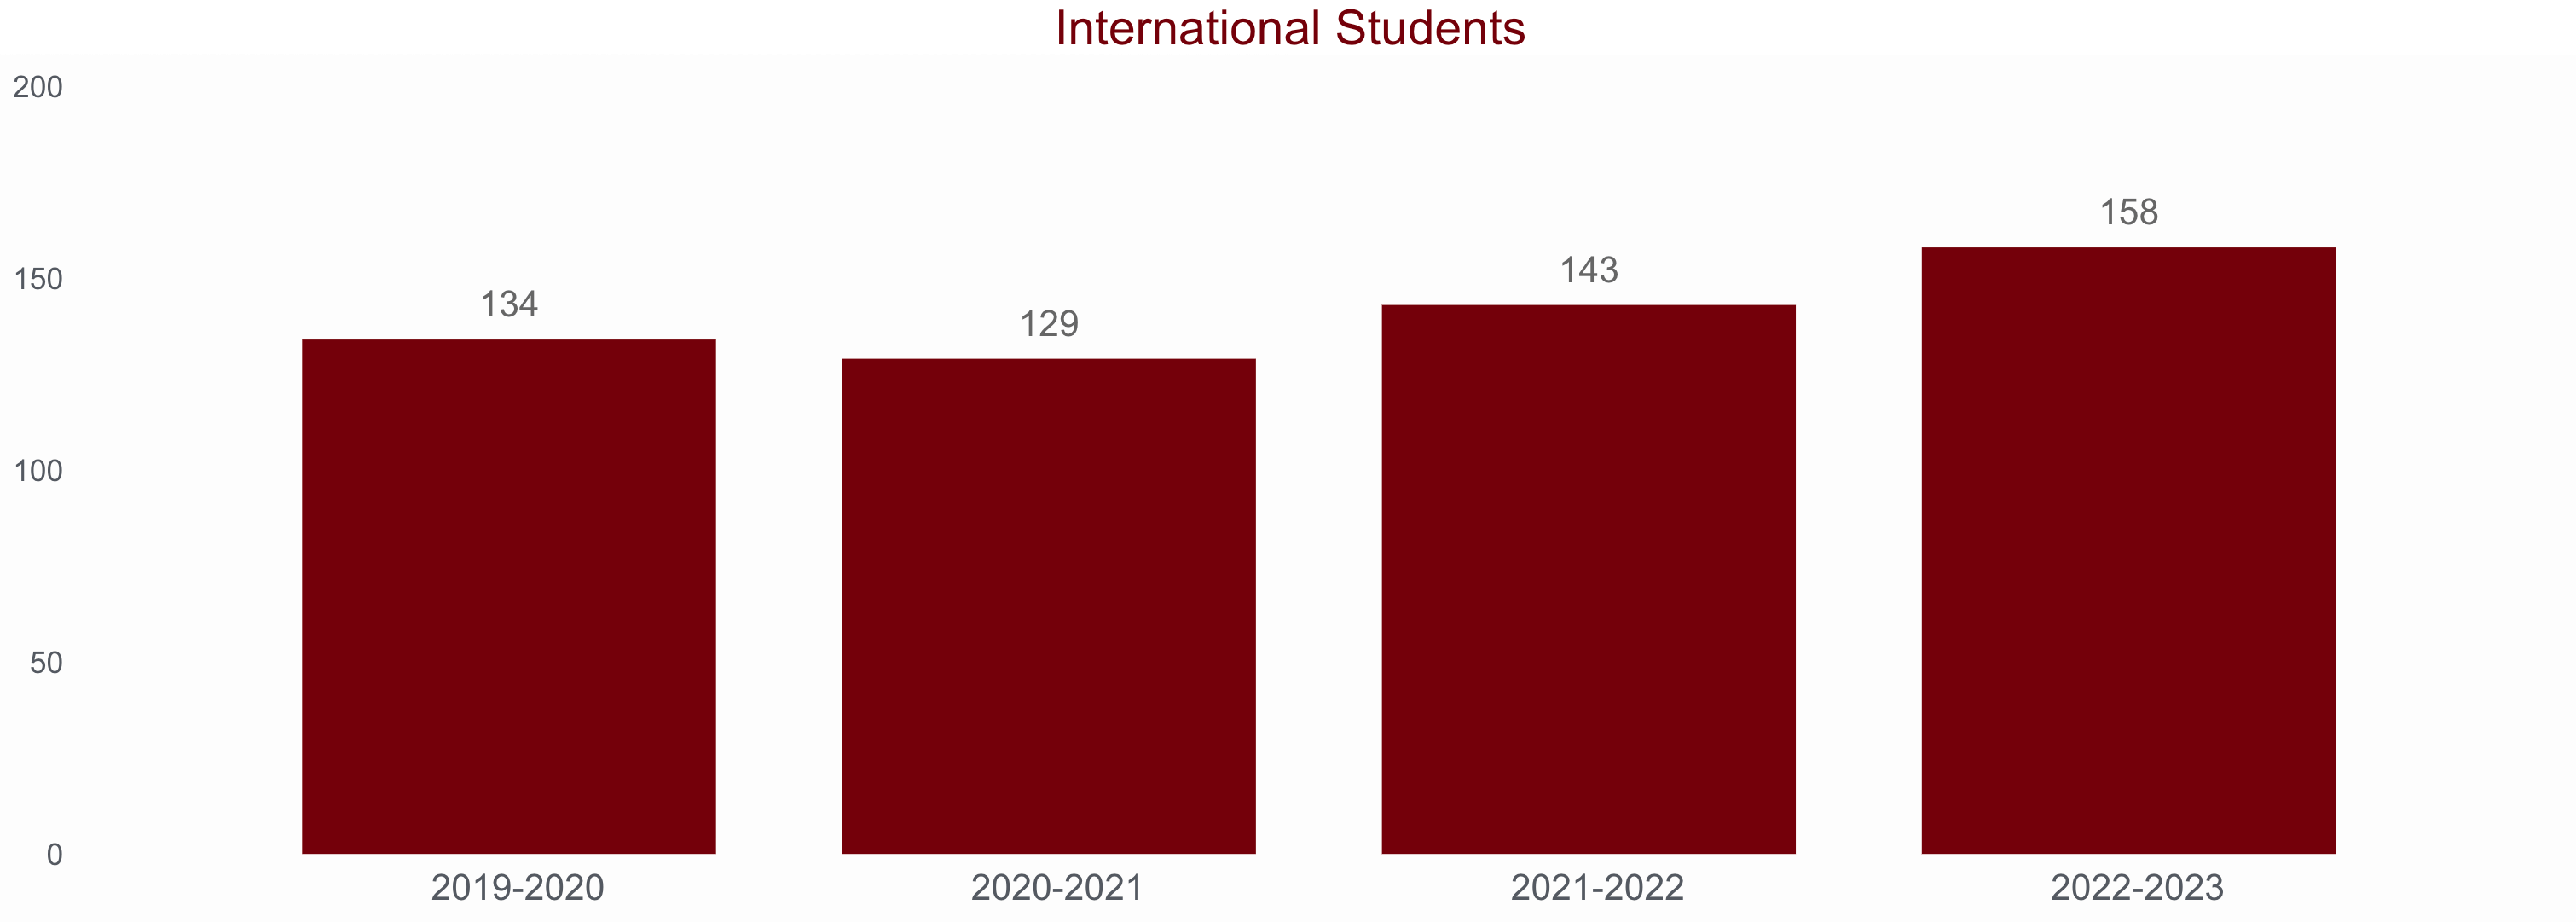 Bar chart showing the number of international students